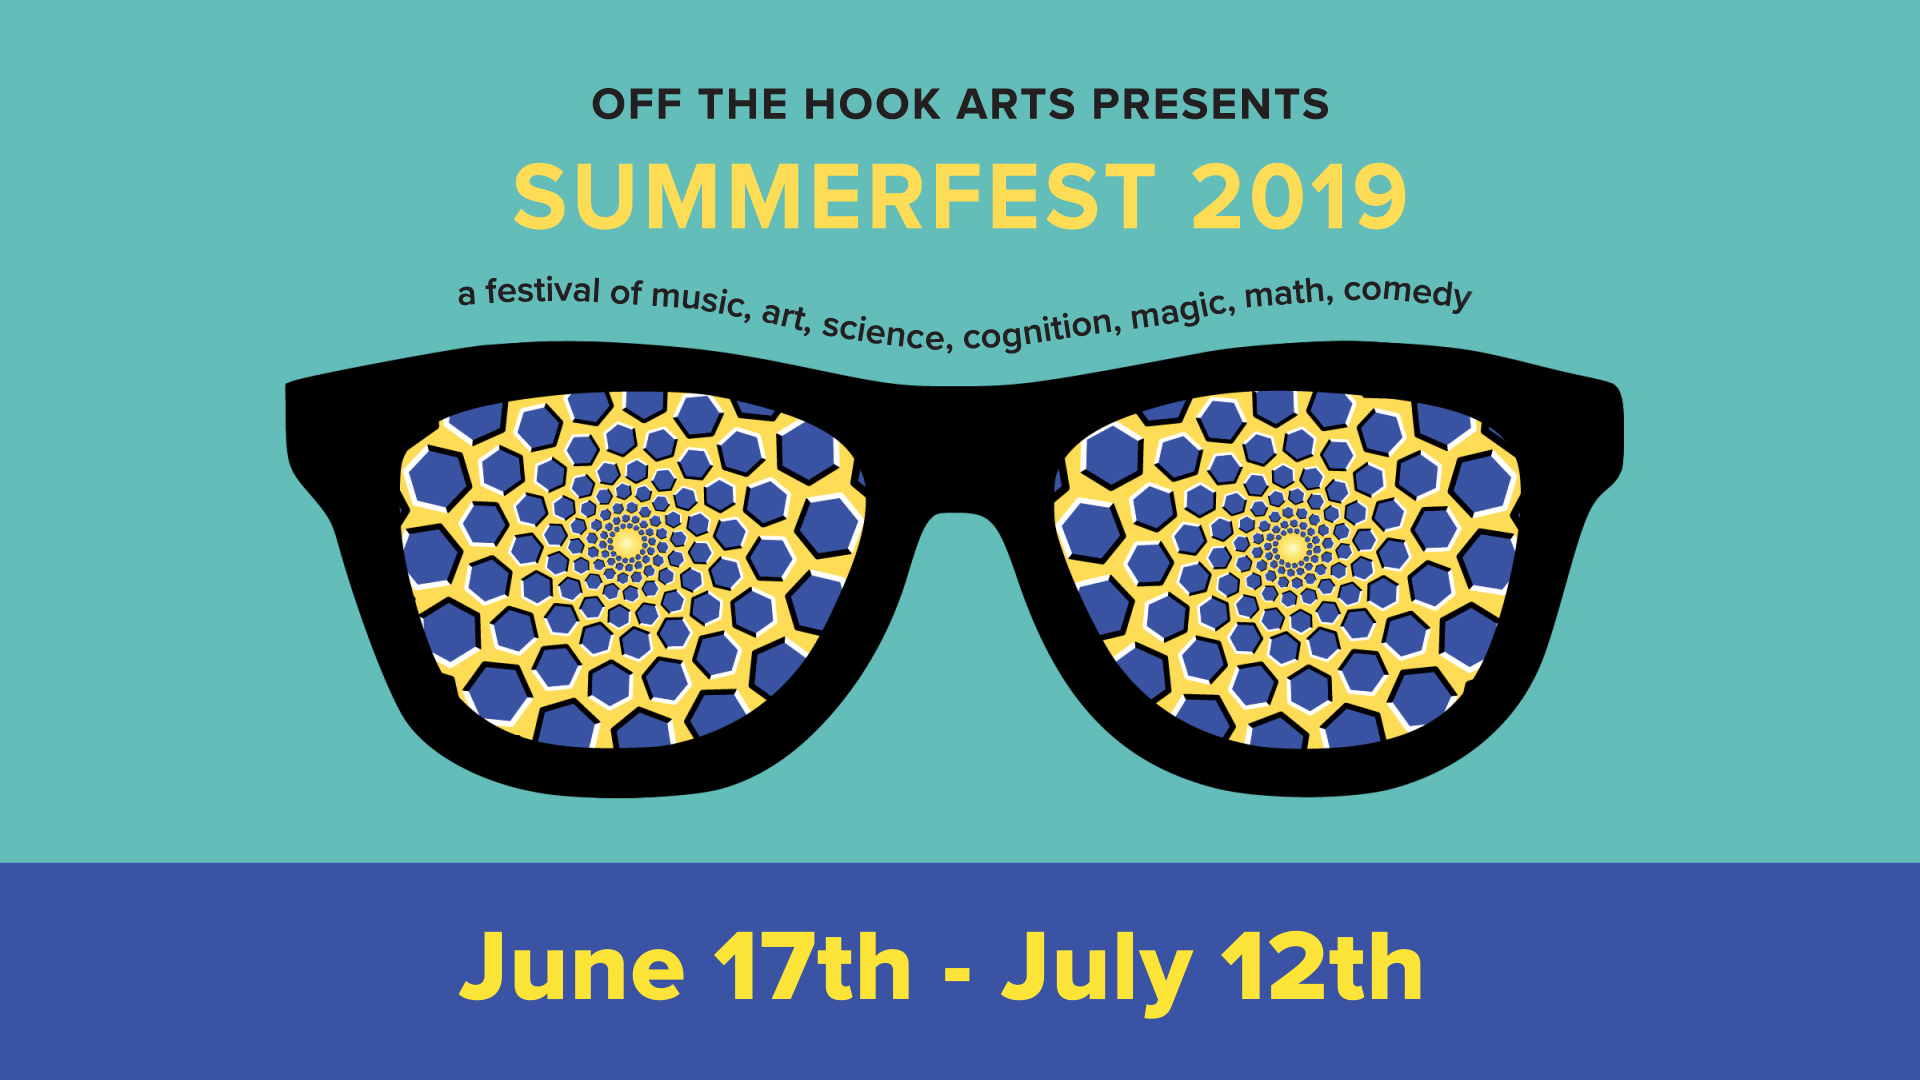 Off The Hook Arts SummerFest 2019 video, by Phil Donaldson